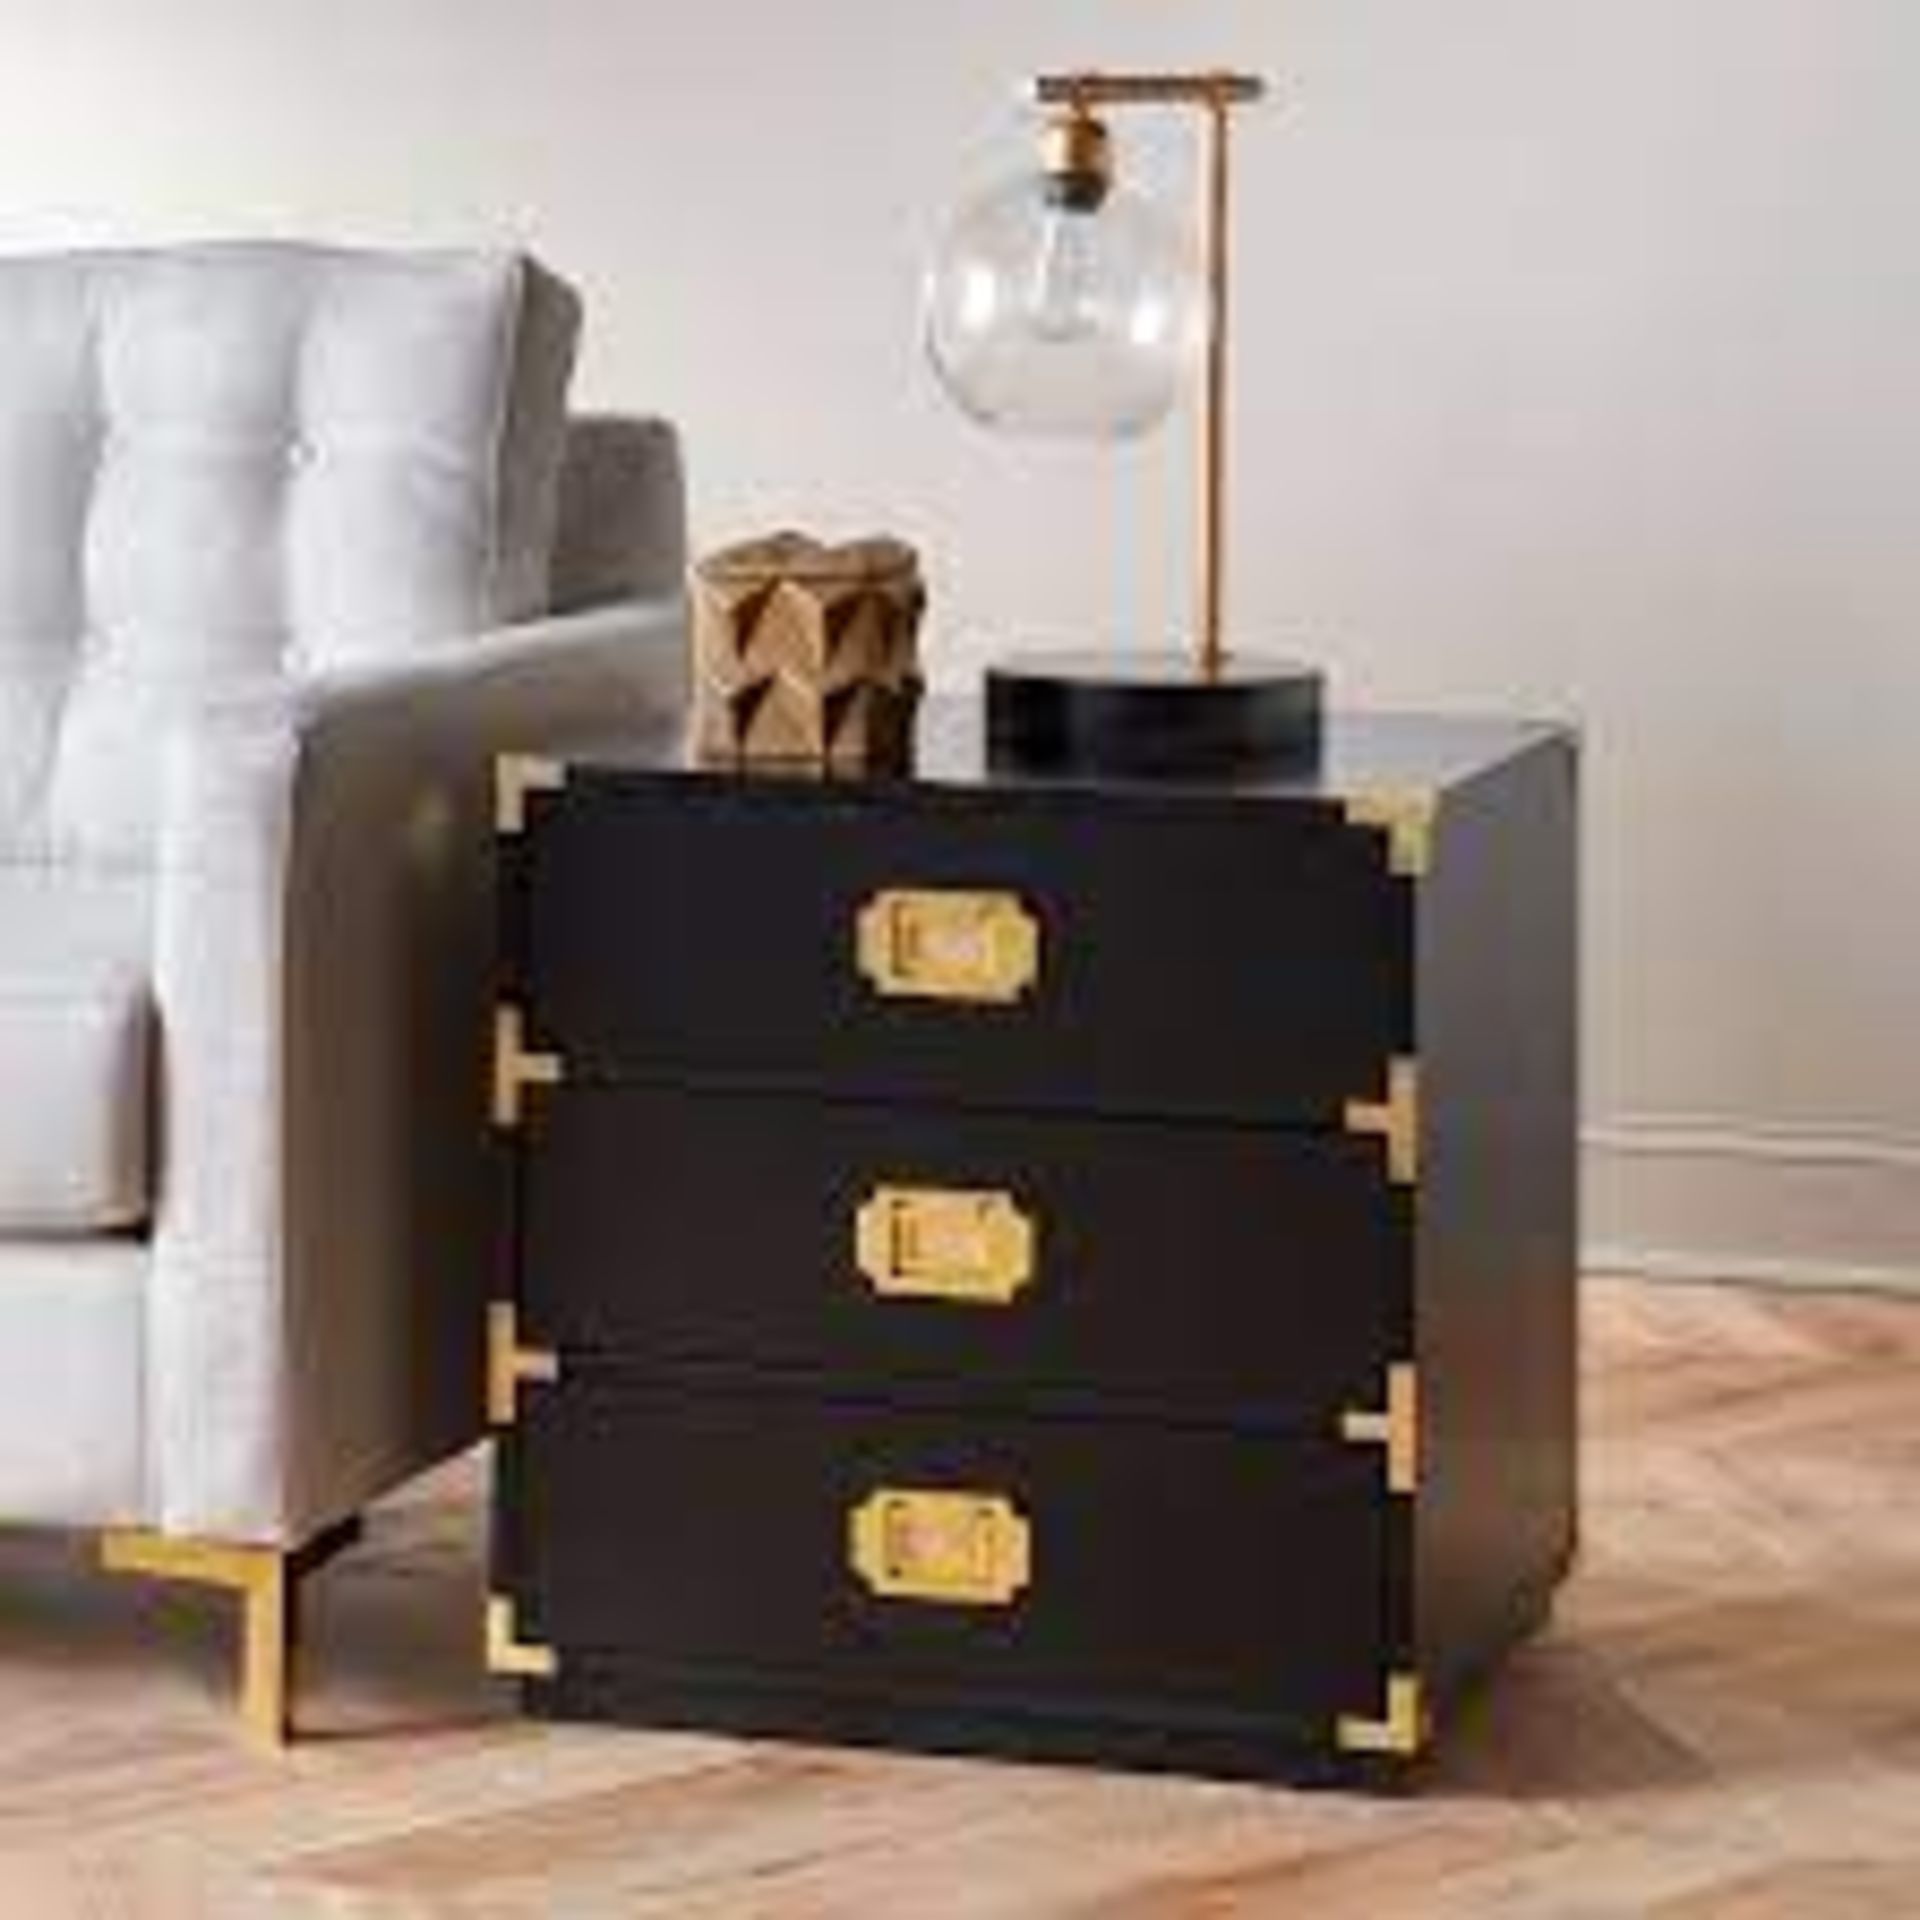 Kelly Side Table with Storage. An end table is an important addition to a master suite or guest